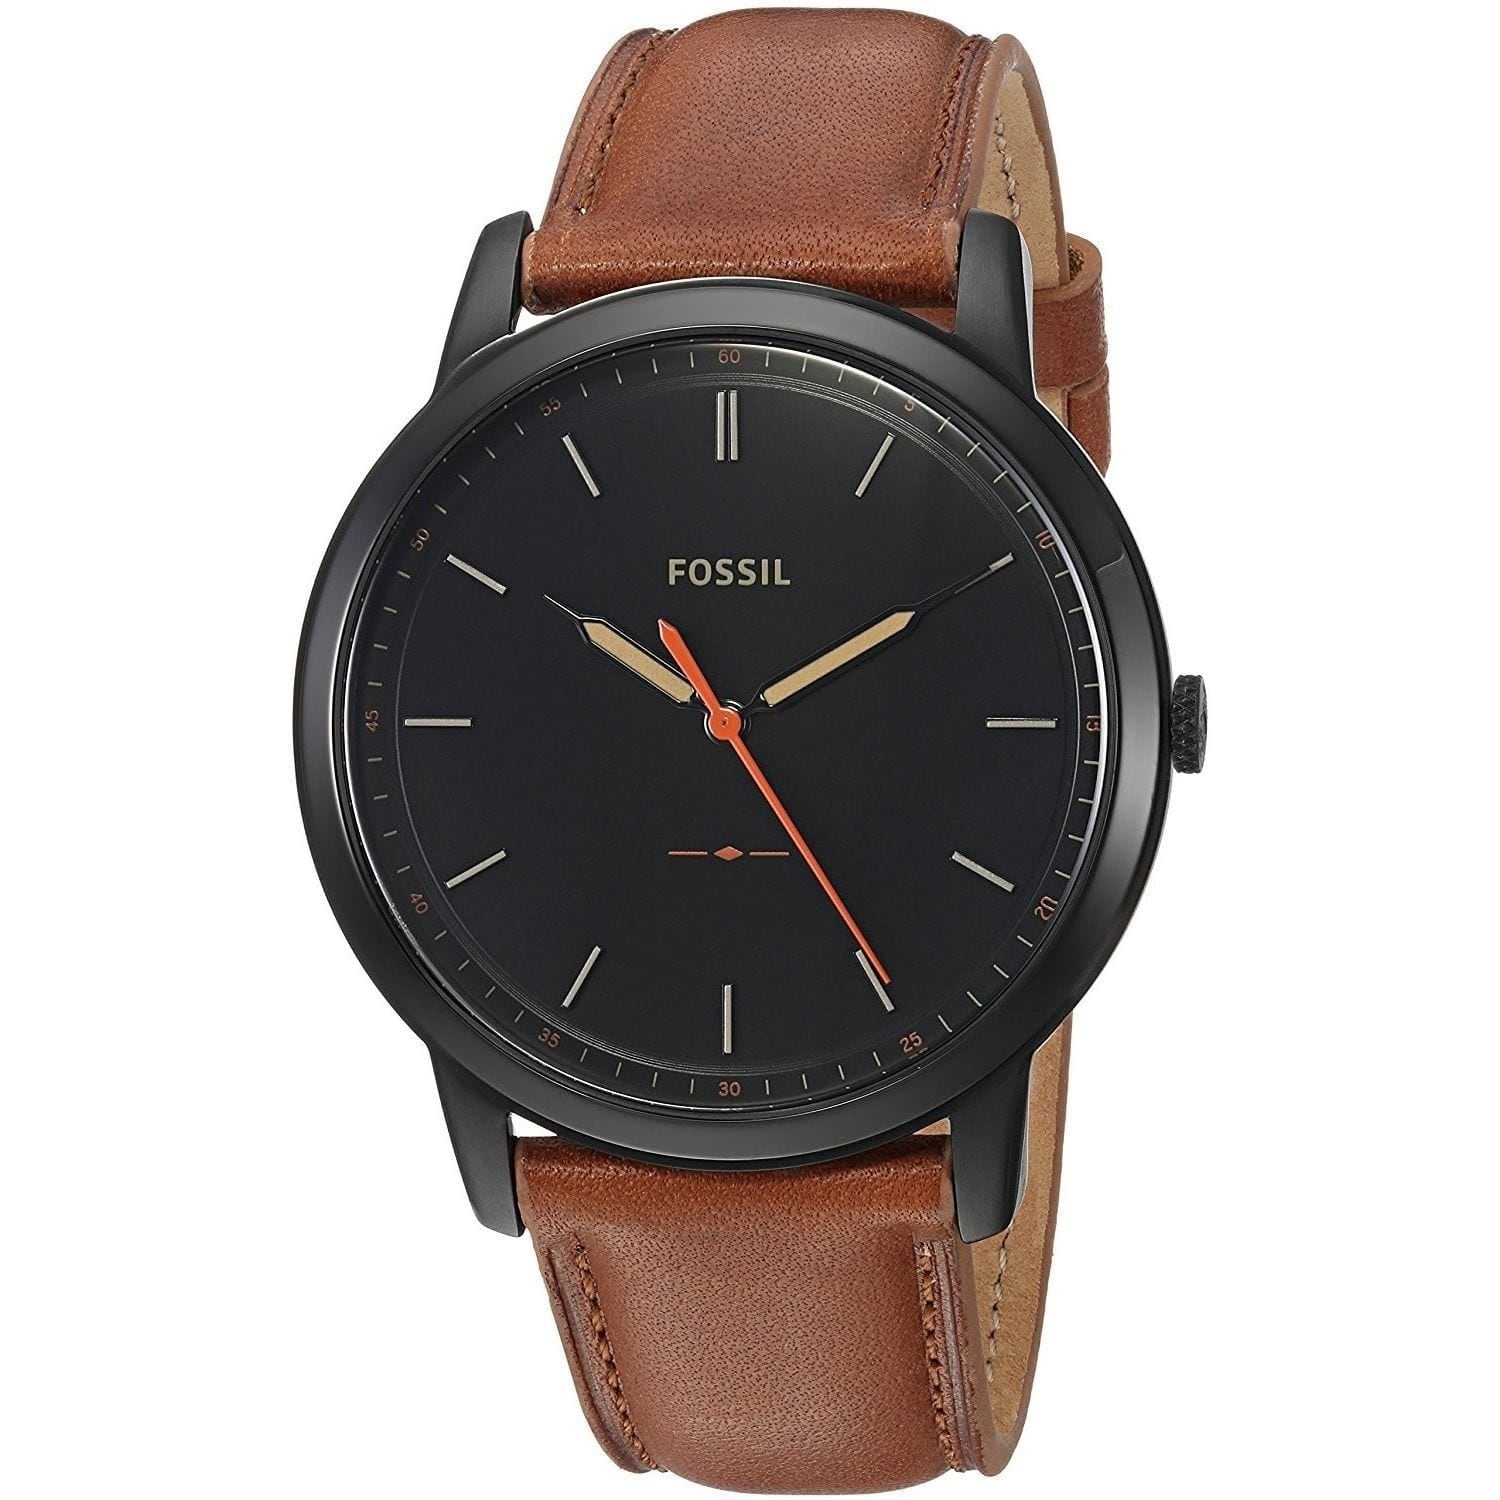 light brown leather watch